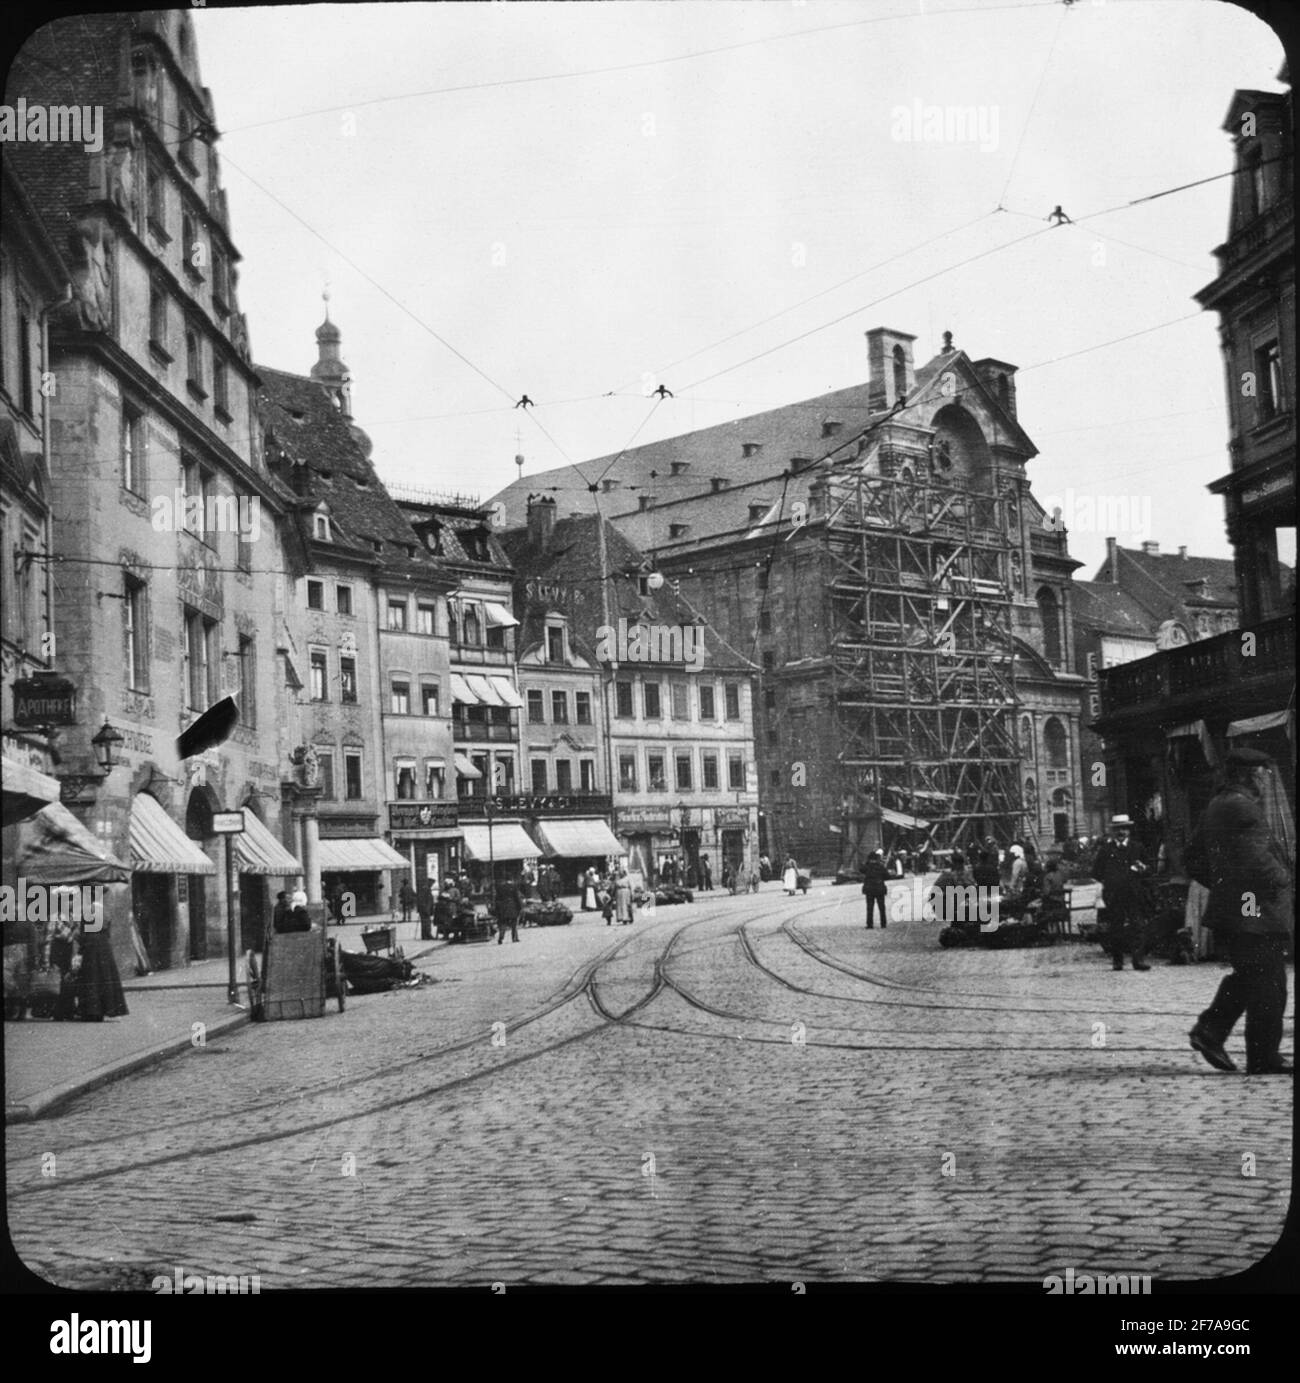 Skioptic image with motifs of street Grüner Markt in Bamberg. Renovated by church St. Martin.The image has been stored in cardboard labeled: the journey 1907. Bamberg 8. 19. Text on image: 'Grüner Markt'. Stock Photo